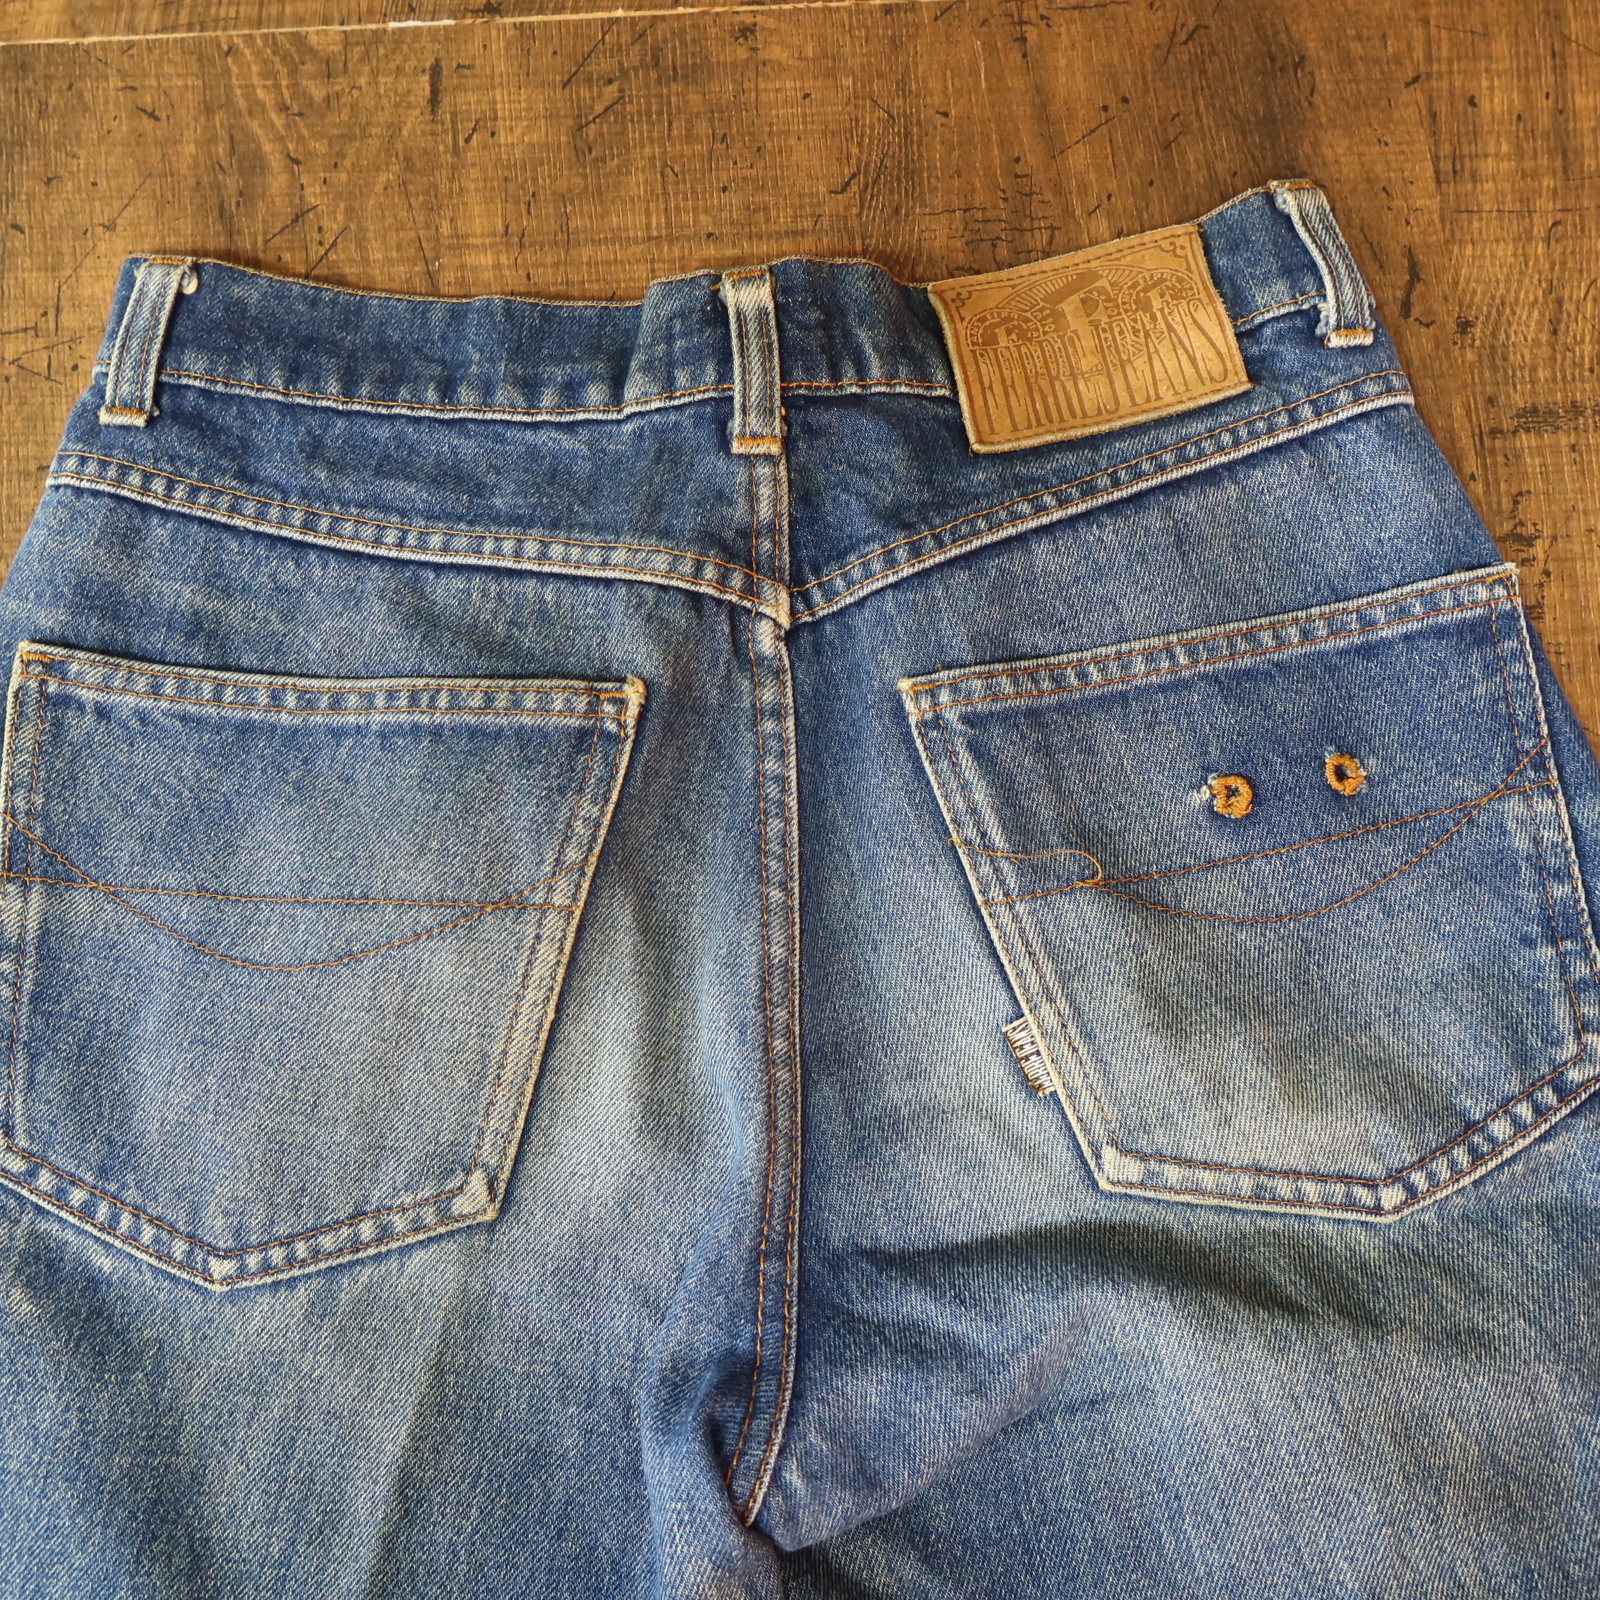 00s～ Vintage EURO古着☆FERRE JEANS フェレジーンズ イタリア製 ヒゲ ...